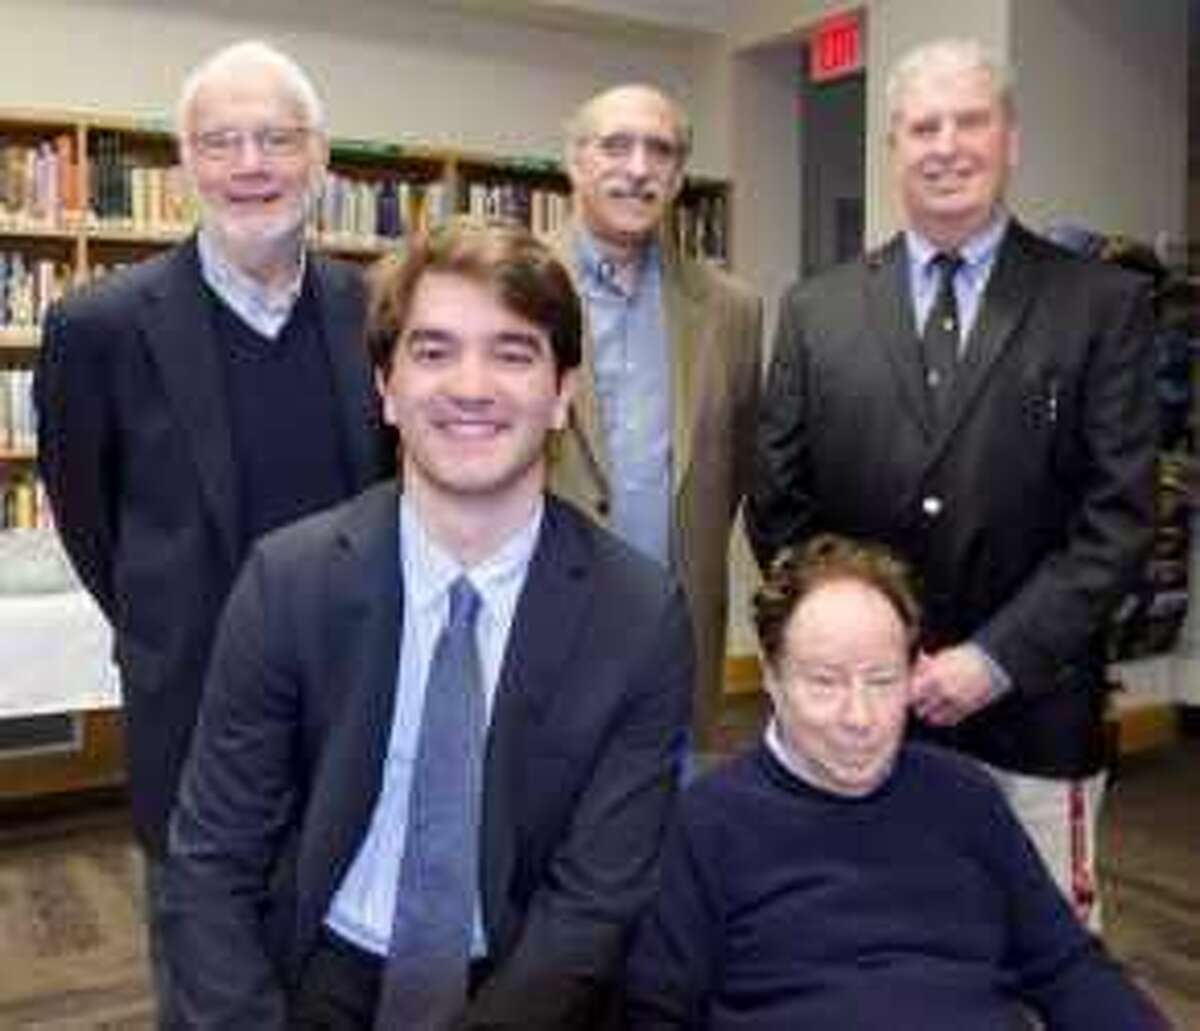 Hamden Hall Country Day School hosted three Nobel laureates for a panel discussion titled American Science in the 21st Century. Pictured, seated from left, is Hamden Hall alumnus Alexandru Buhimschi and Dr. Sidney Altman; standing, from left, are Dr. Thomas A. Steitz, Dr. Martin Chalfie and Hamden Hall science teacher Dr. Frank Gasparro.